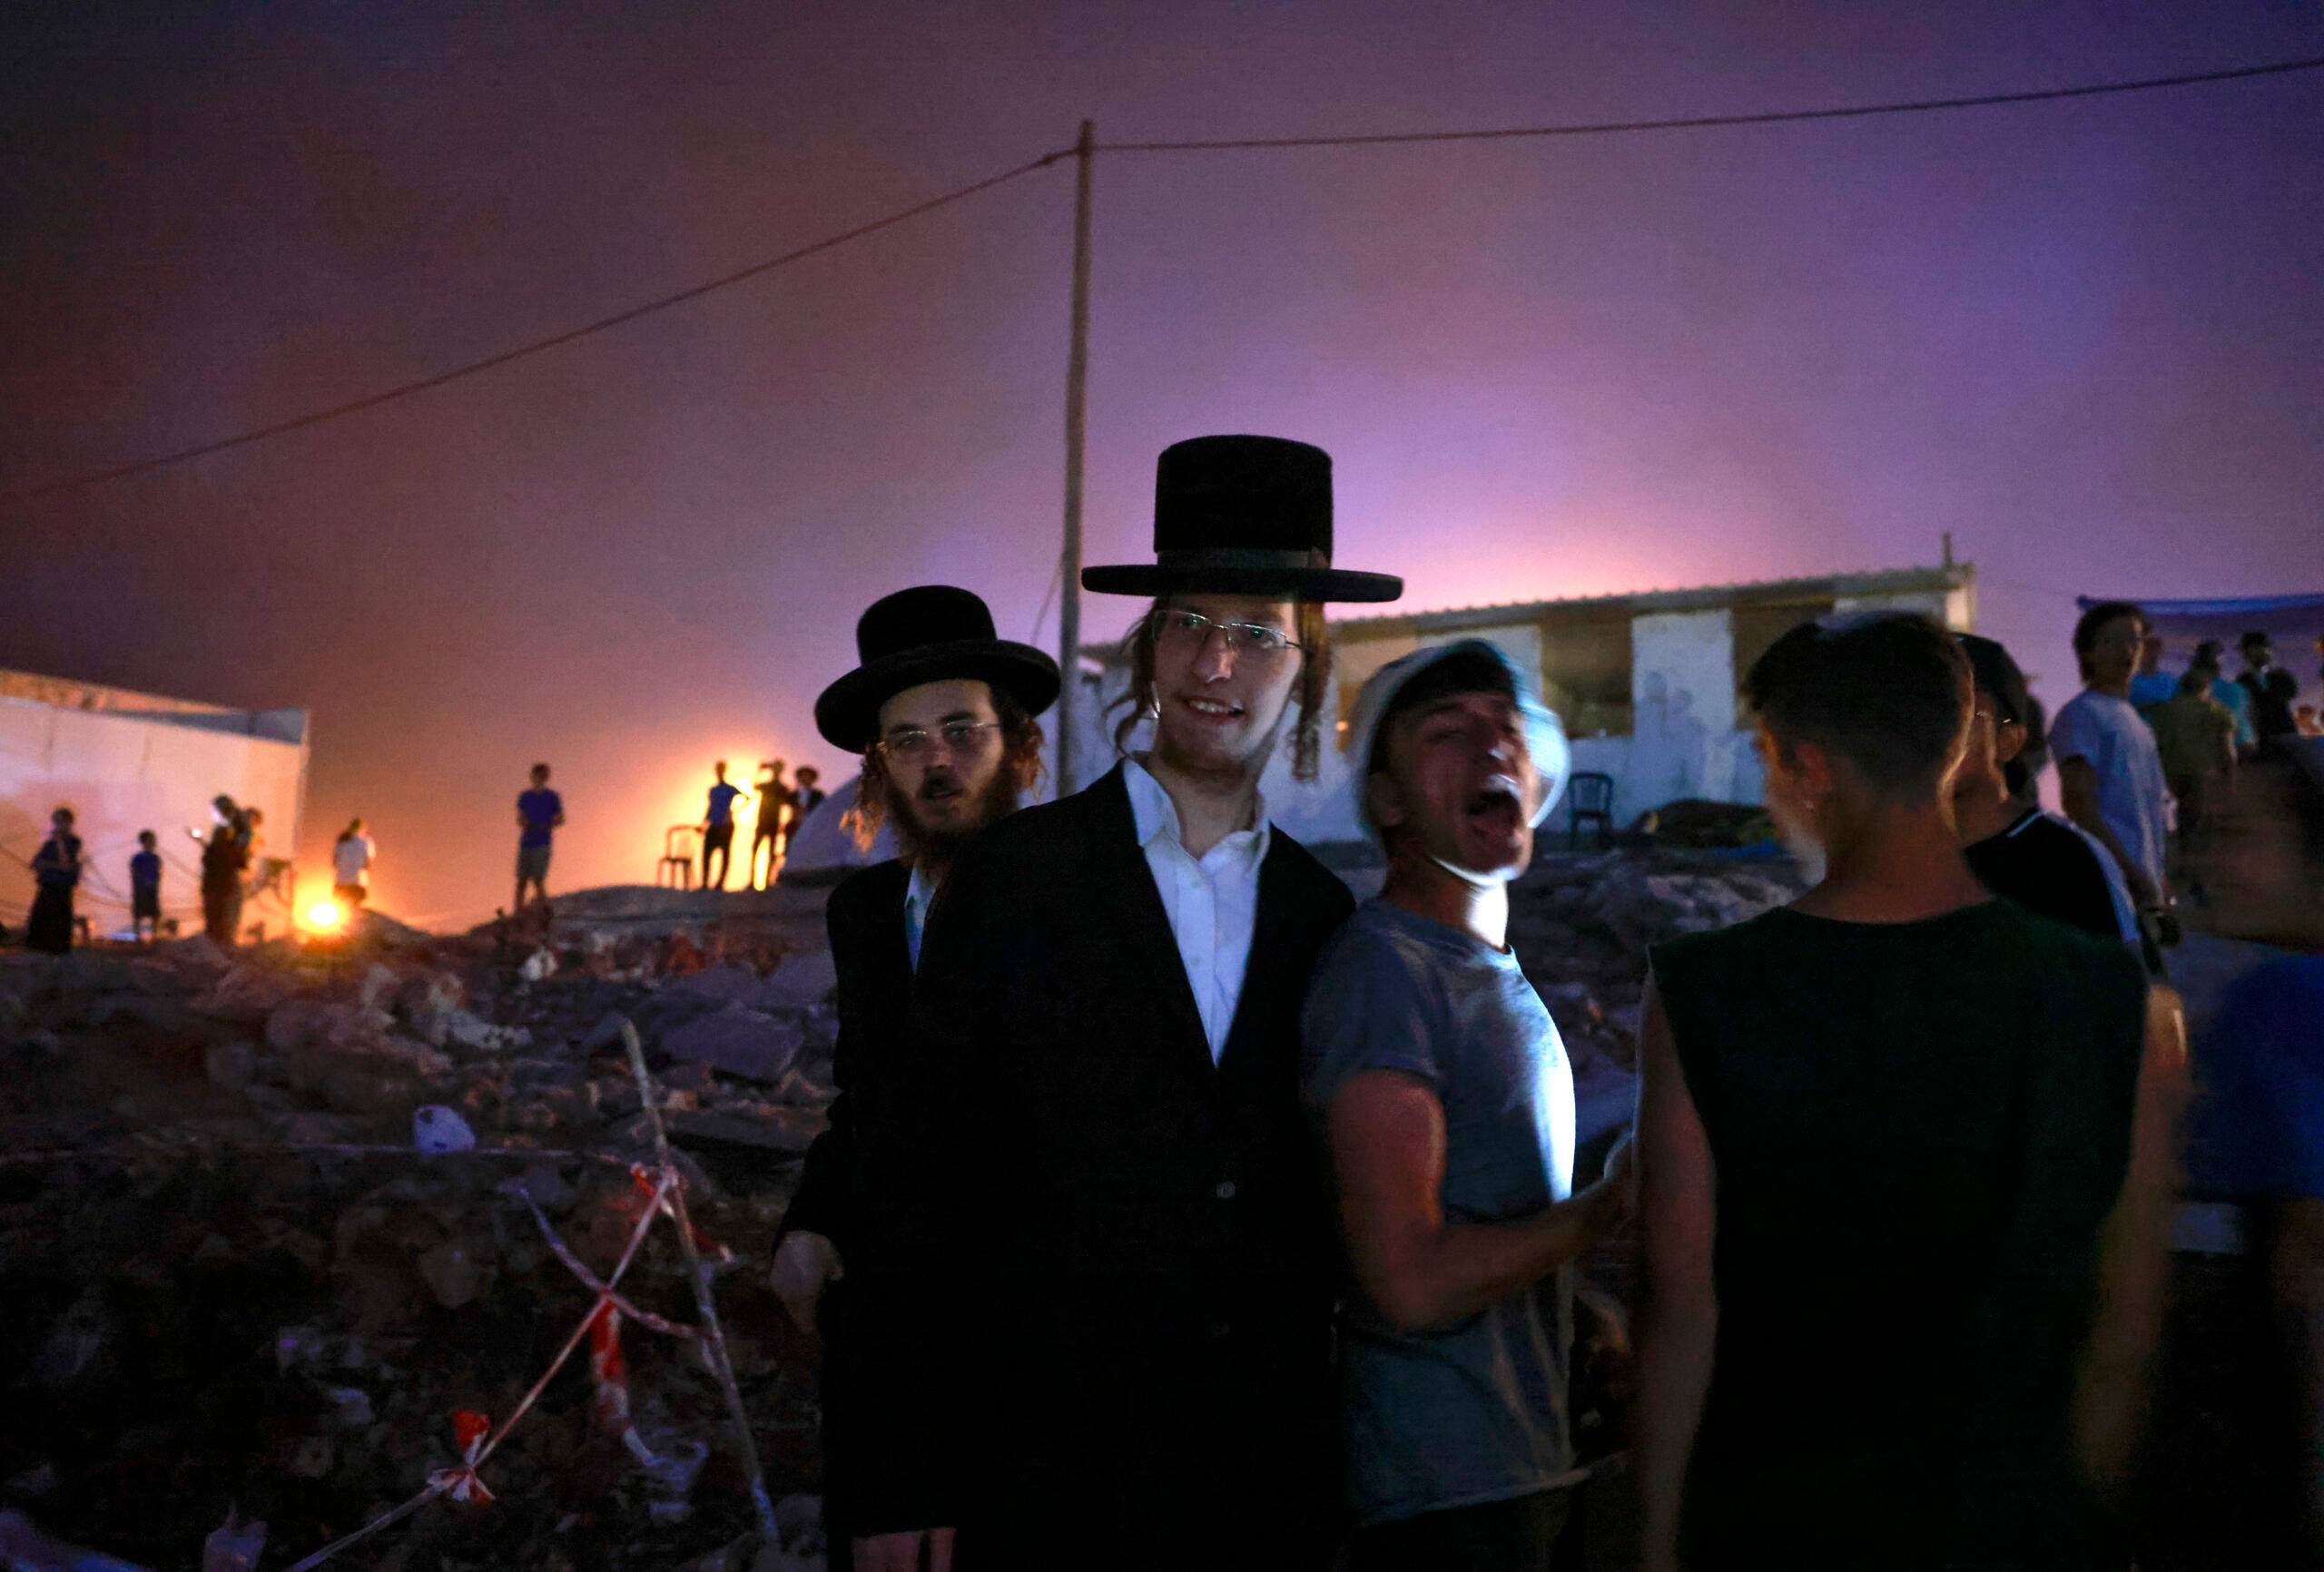 Israeli ultra-Orthodox men and settlers gather in the newly-established wildcat outpost of Eviatar near the northern Palestinian city of Nablus in the occupied West Bank, on June 28, 2021. - Jewish settlers agreed to leave a new outpost in the occupied West Bank that has stirred weeks of Palestinian protests following a deal with Israel's government, in an agreement confirmed by the interior ministry and settler leaders, under which they will leave the Eviatar outpost within days but their mobile homes will remain and Israeli troops will establish a base in the area. (Photo by MENAHEM KAHANA / AFP)